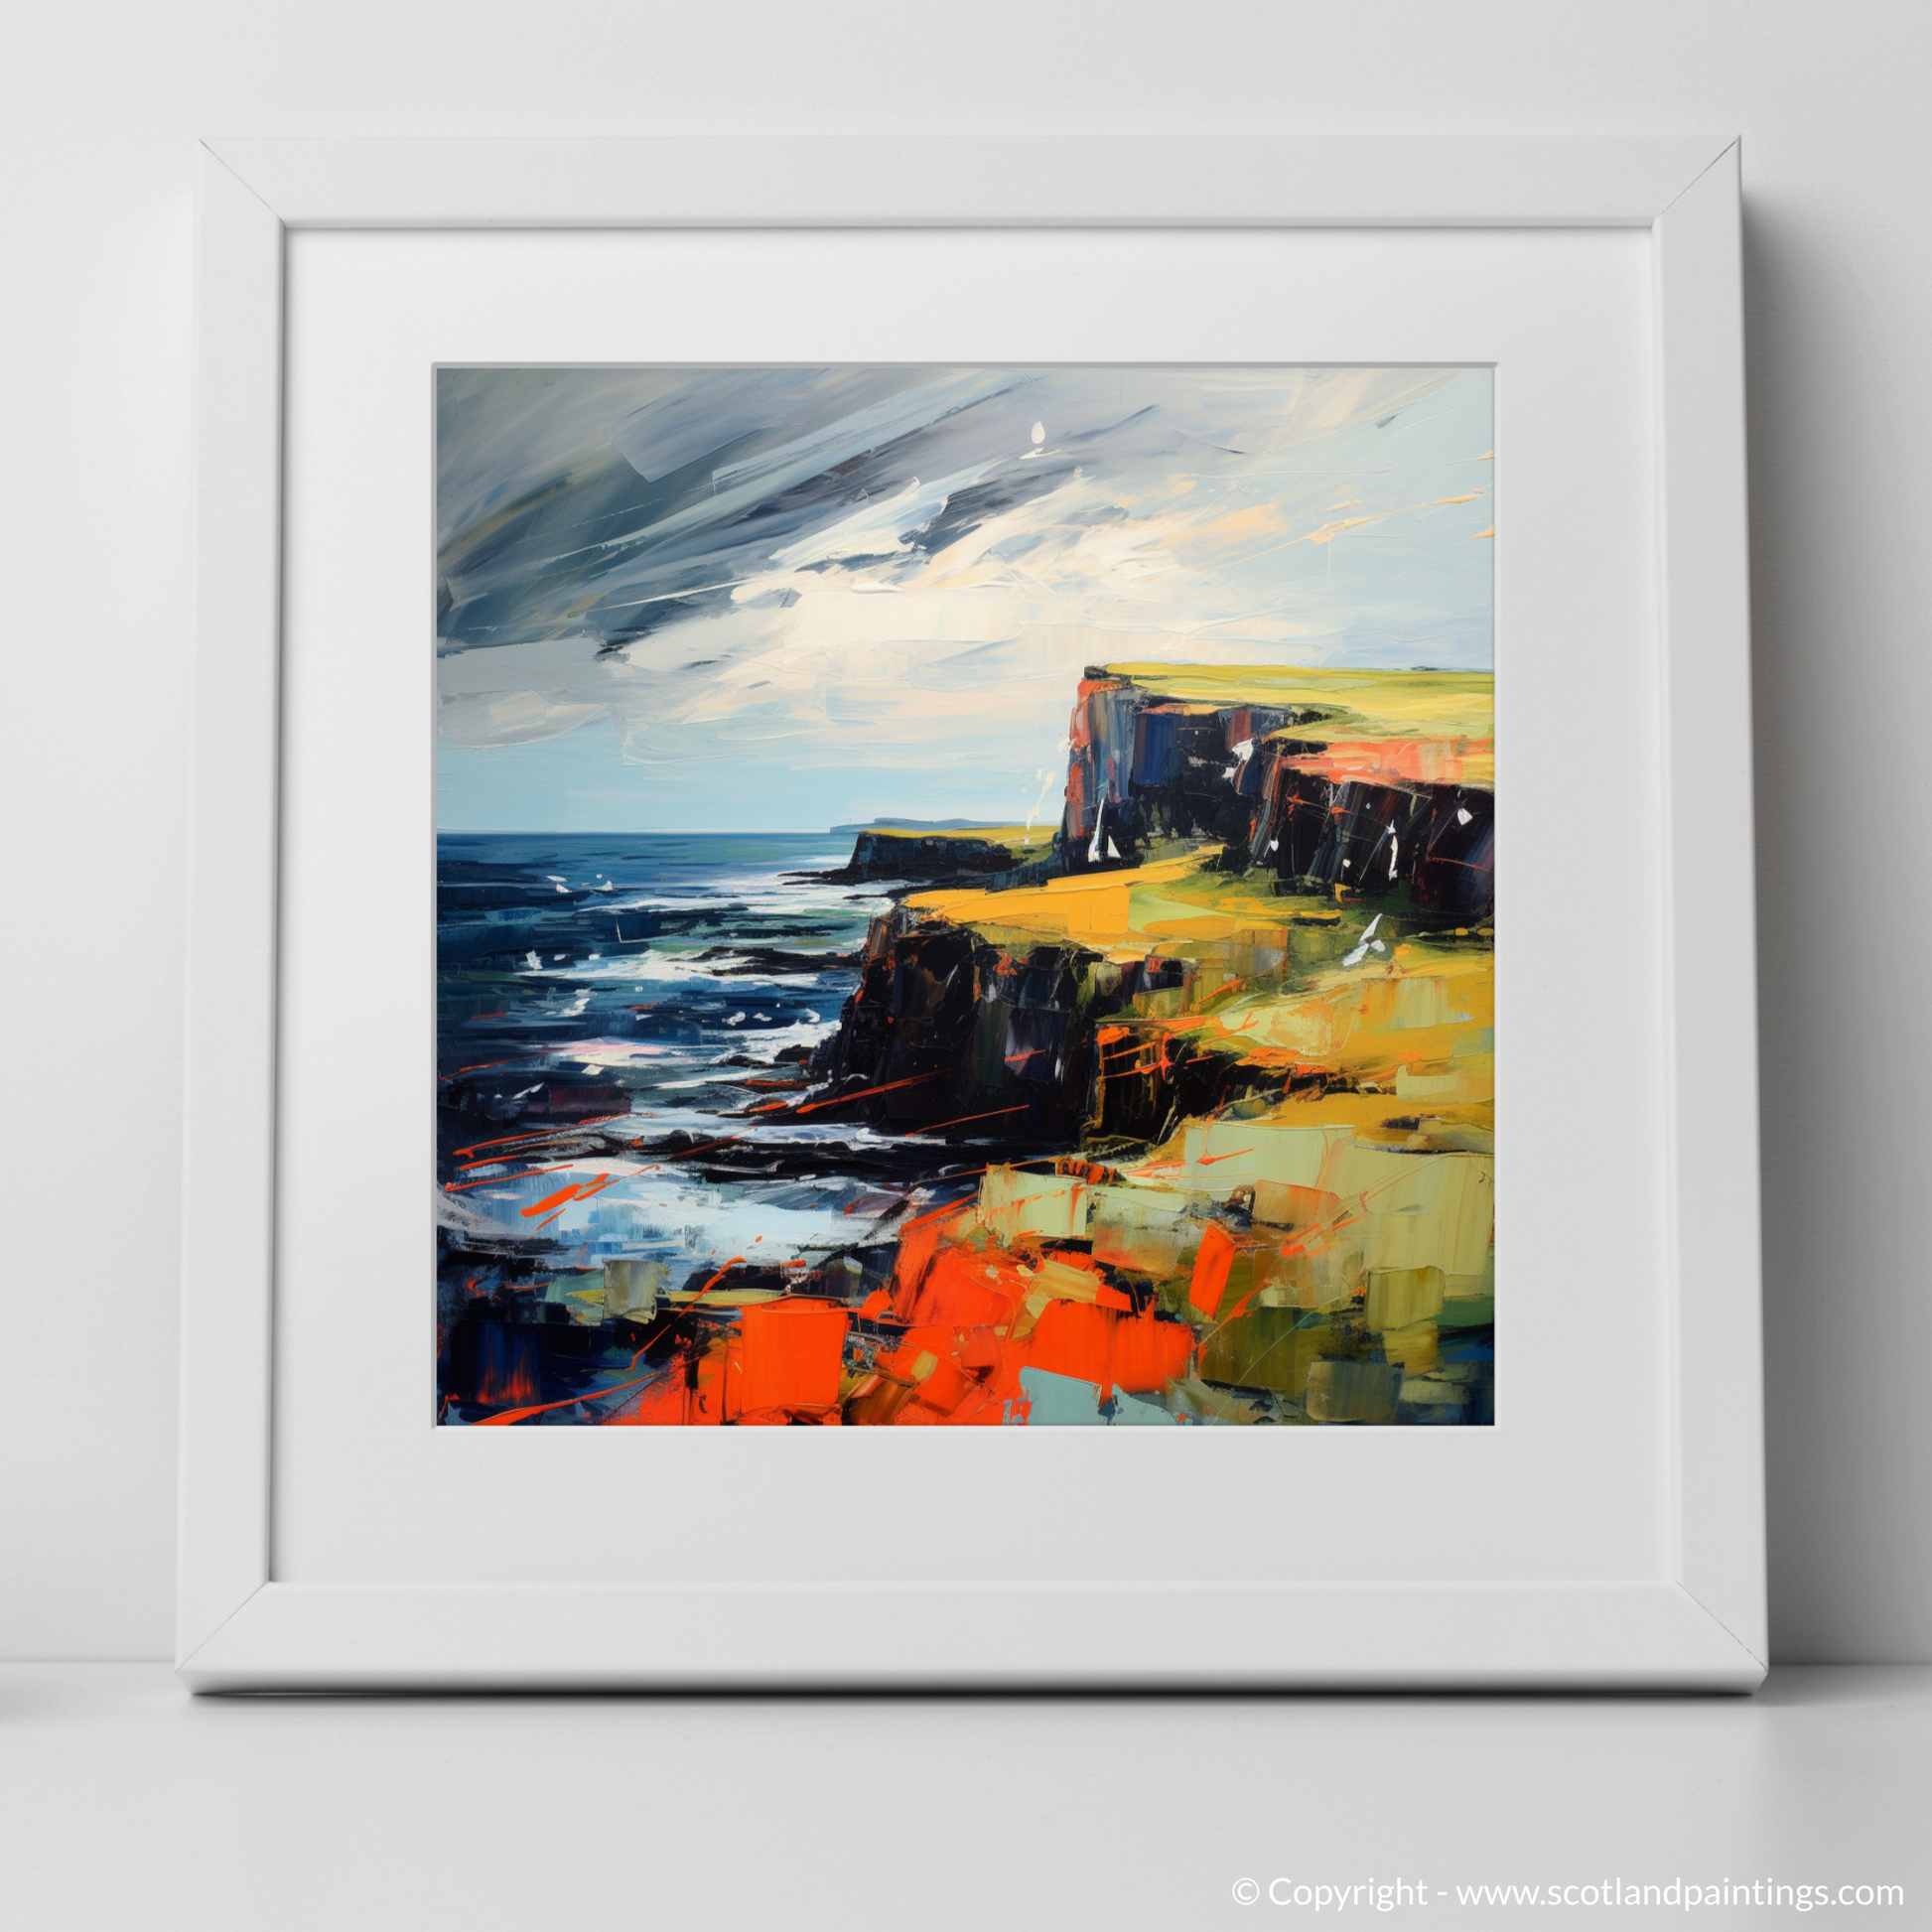 Art Print of Orkney, North of mainland Scotland with a white frame